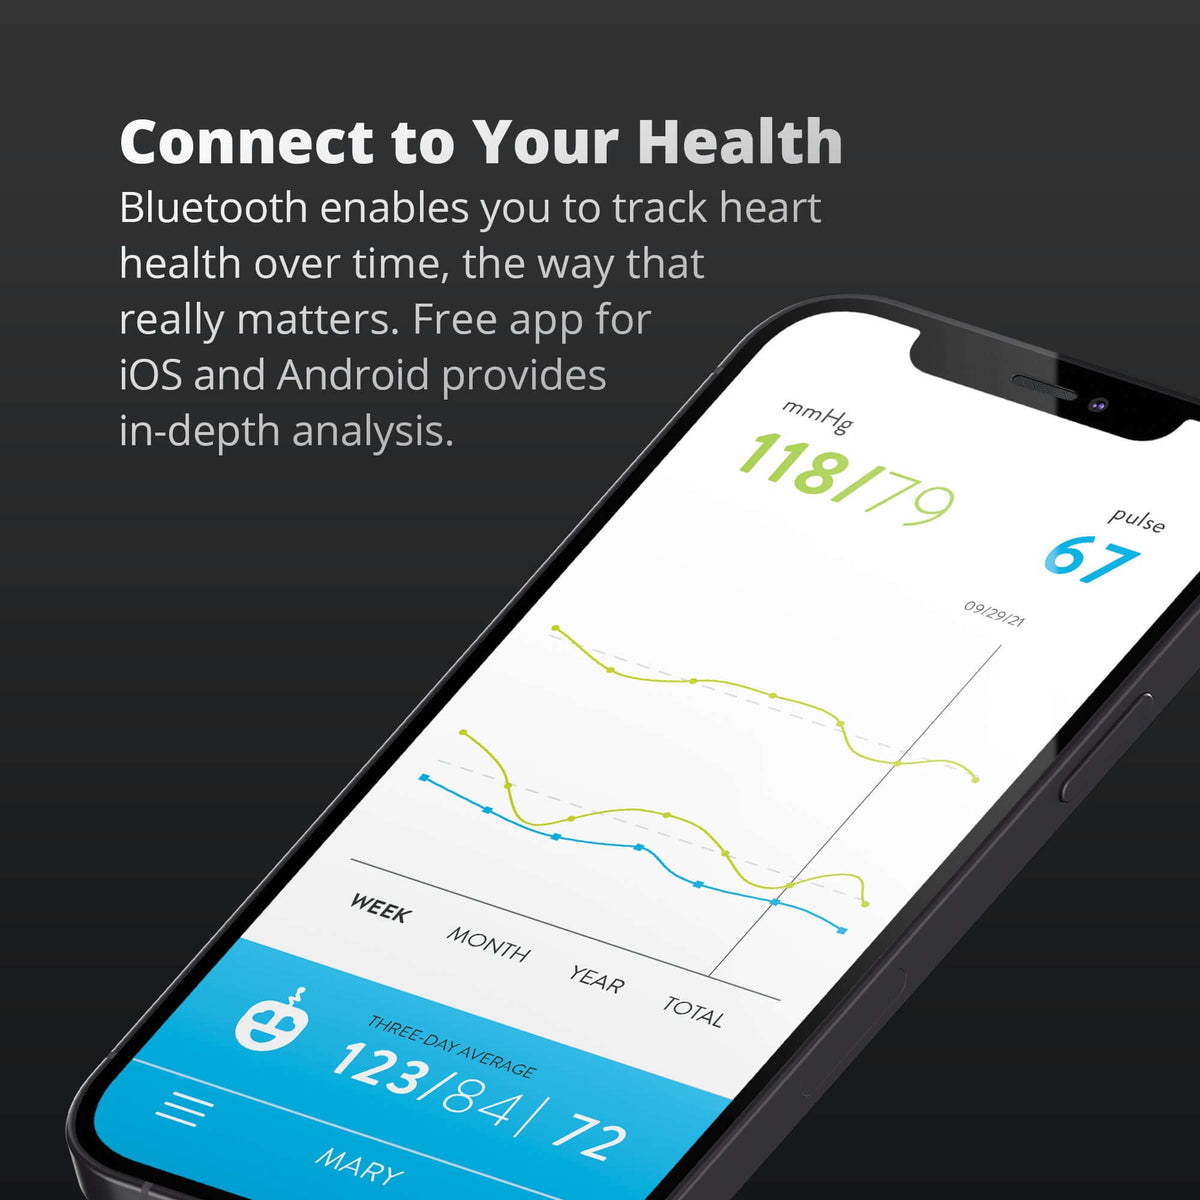 All-in-One Bluetooth Blood Pressure Monitor - Greater Goods